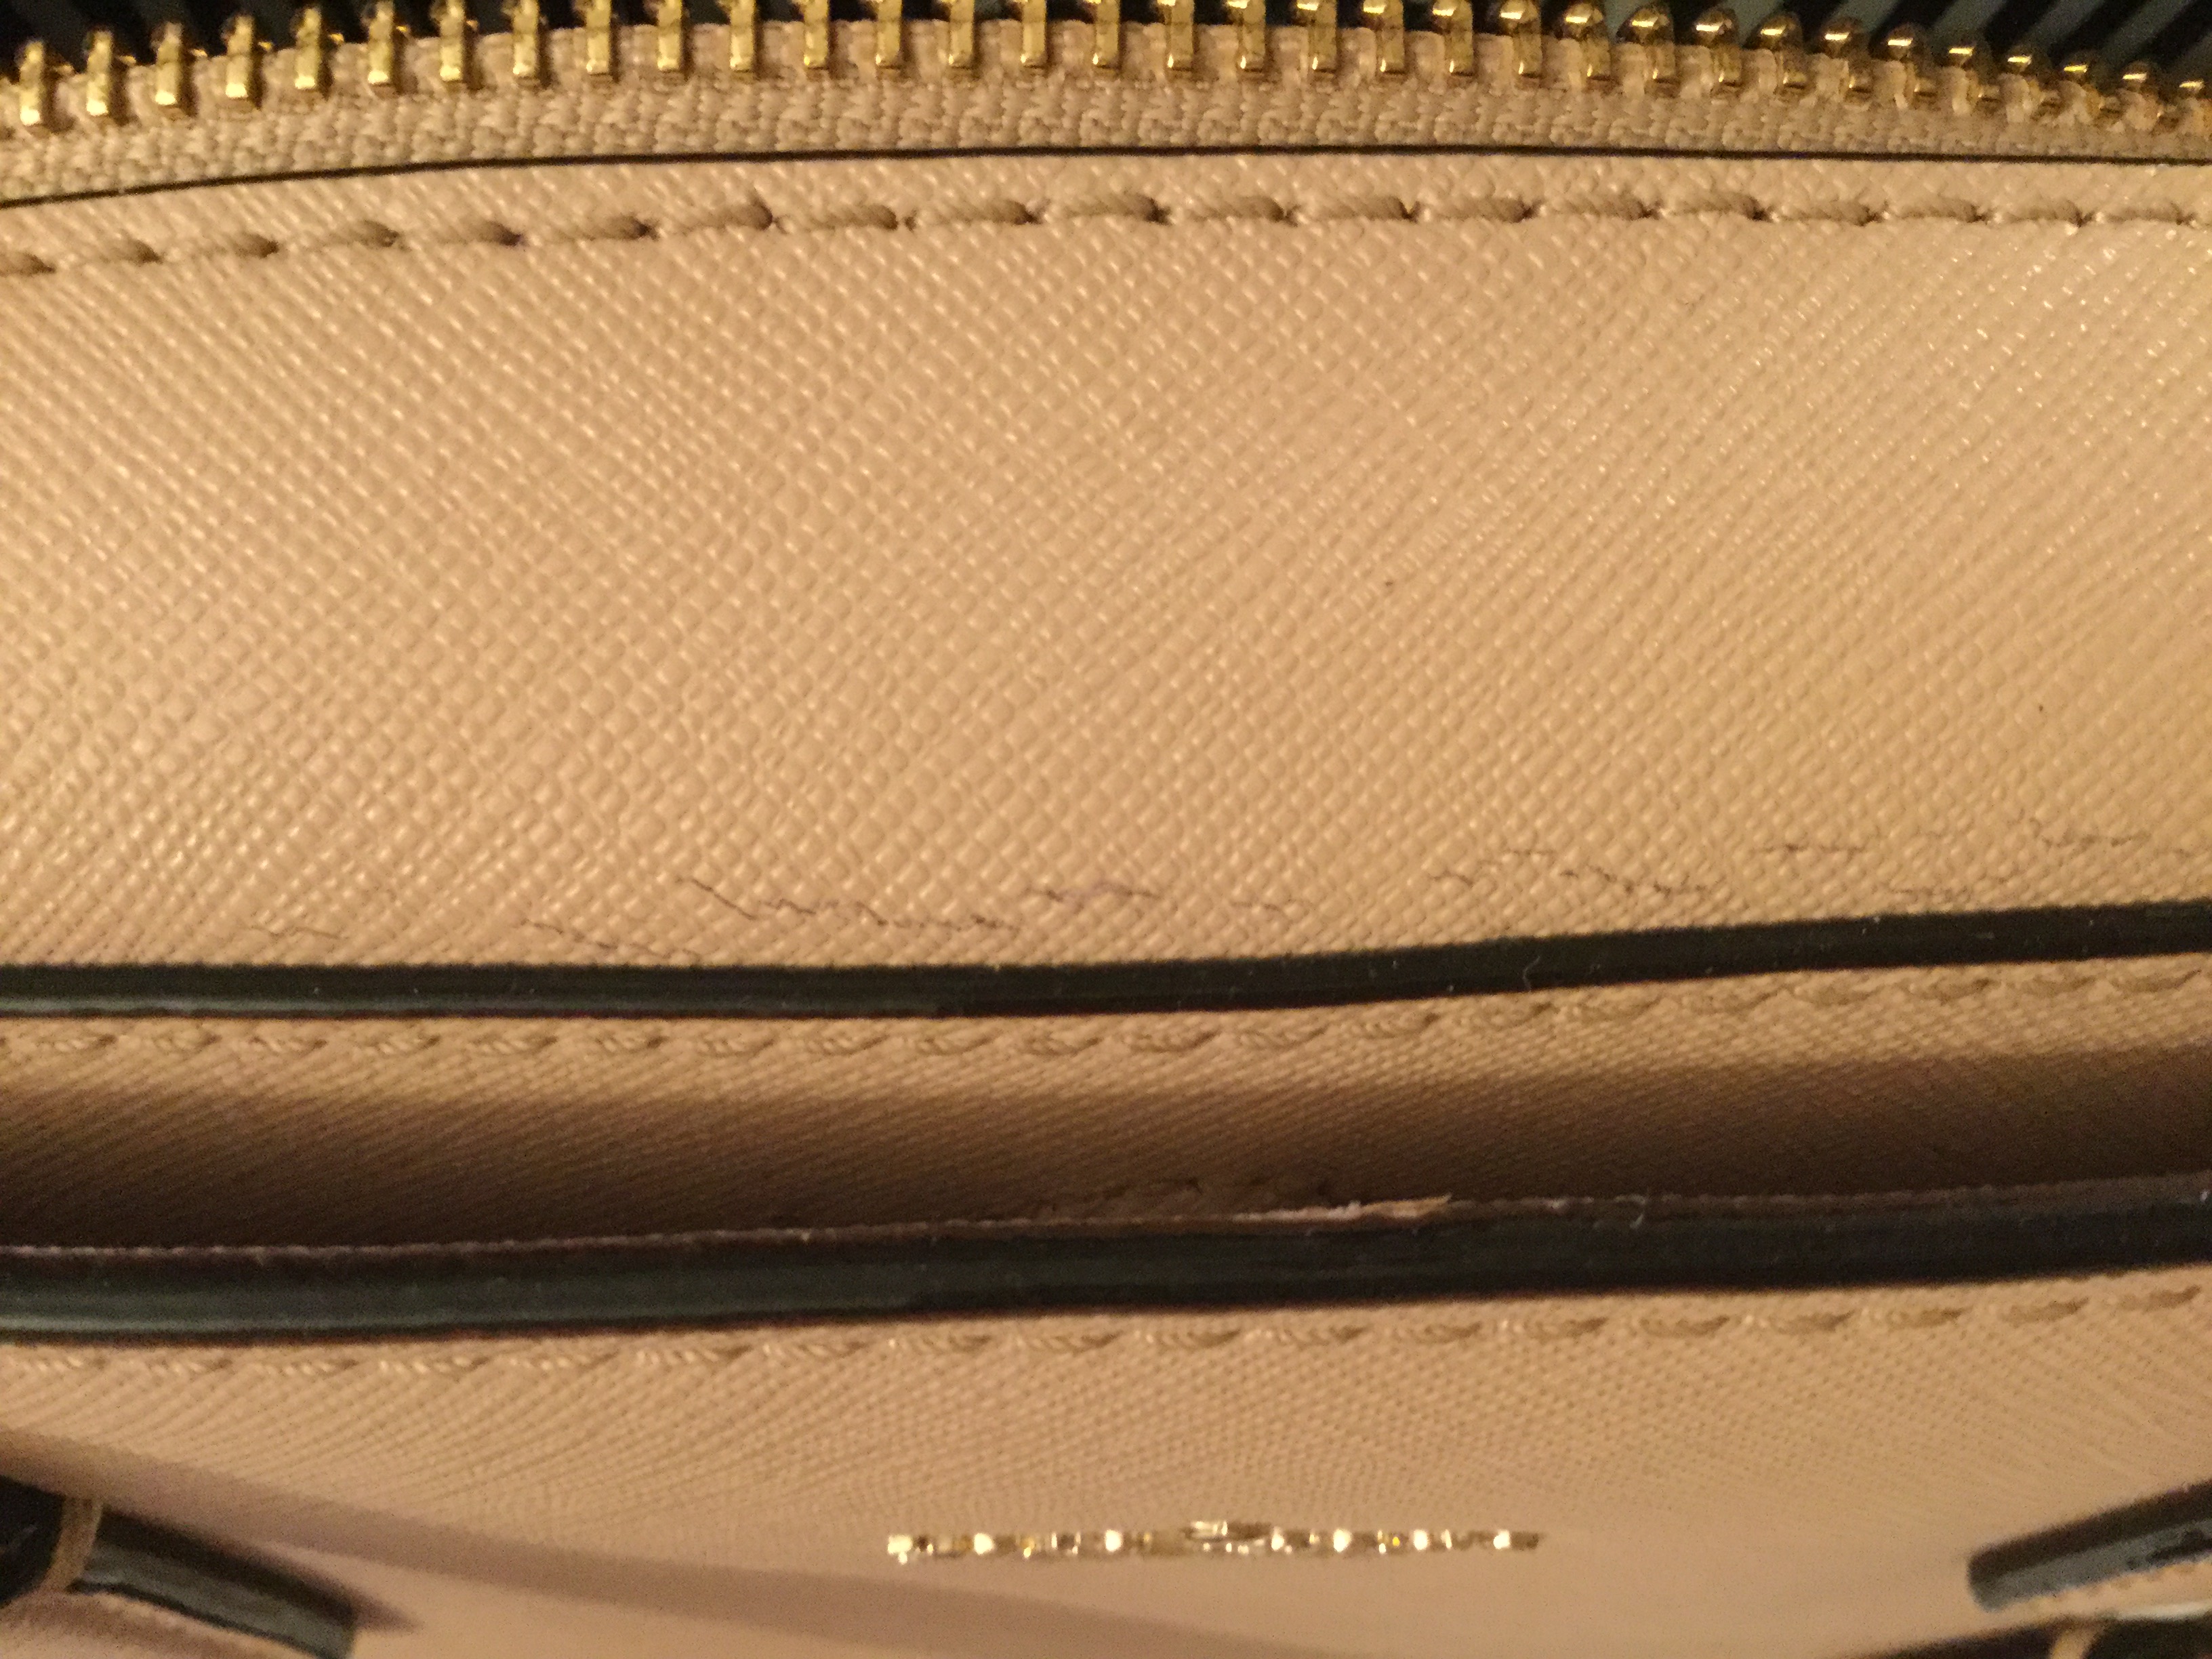 When to complain had this “mint condition” Kate Spade bag for 2